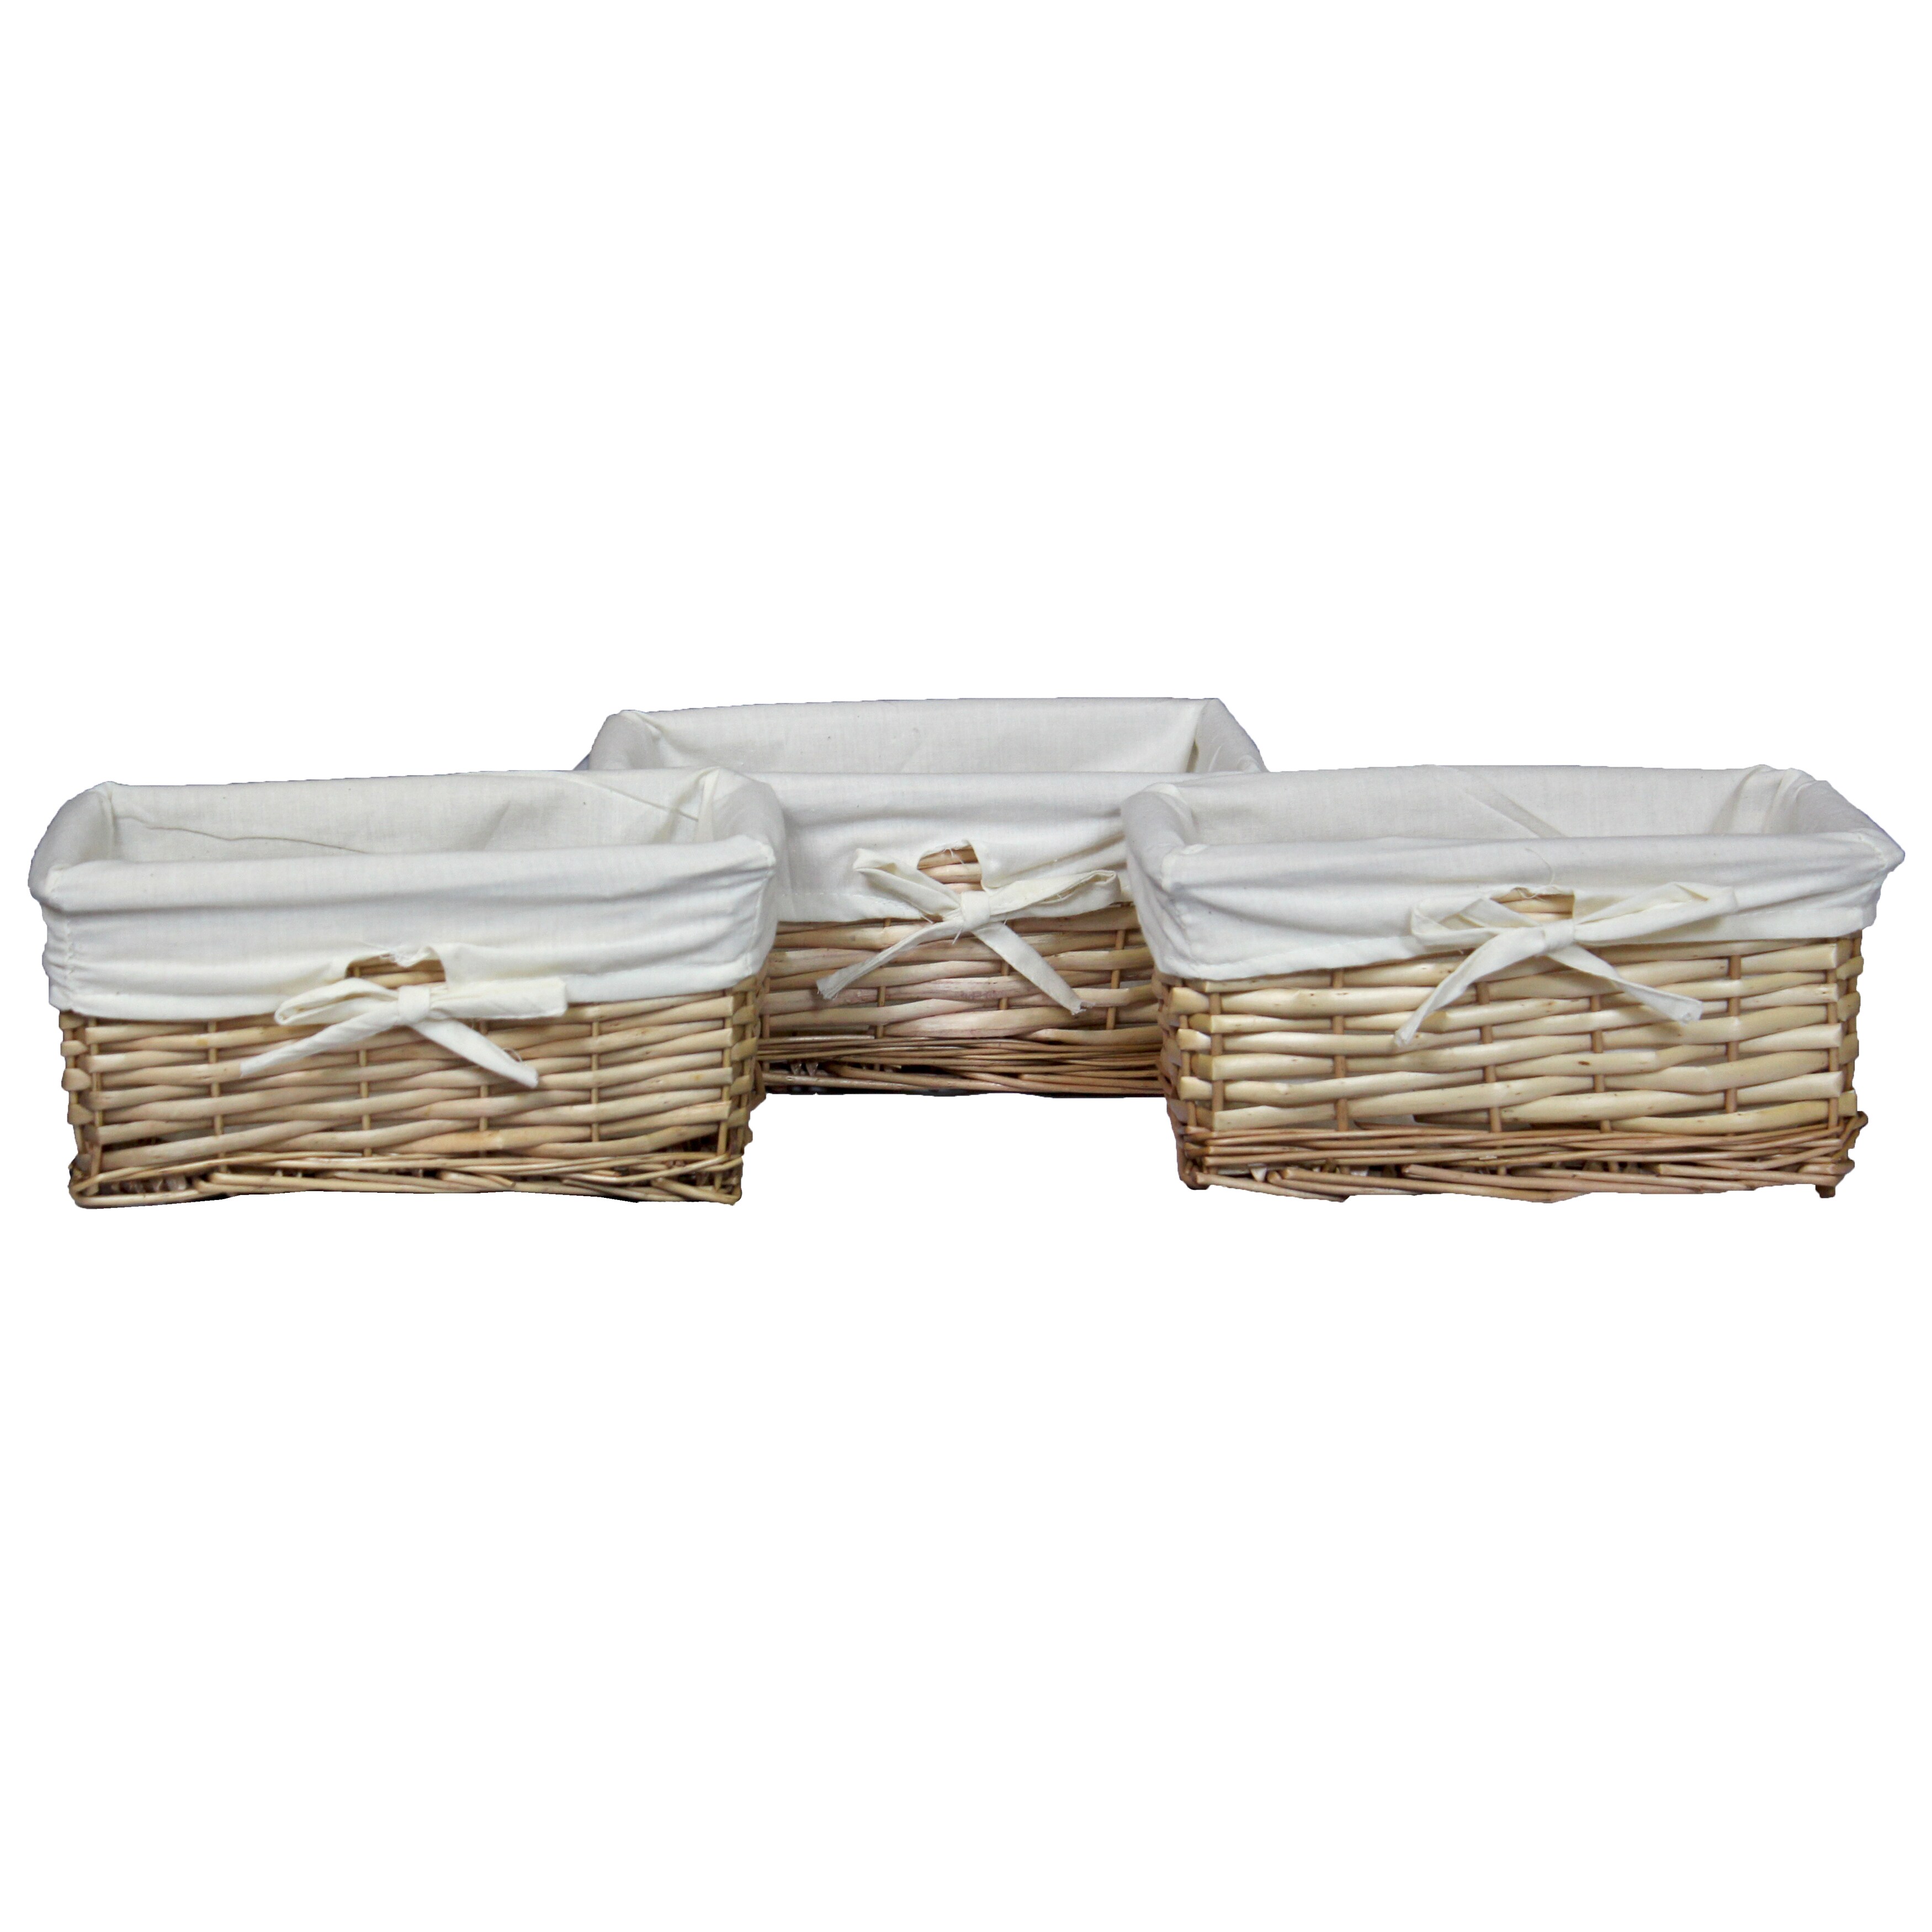 https://ak1.ostkcdn.com/images/products/12020596/Vintiquewise-Willow-Shelf-Basket-with-White-Lining-Pack-of-3-9b3bb063-01e2-4763-bd90-dc9aa753249c.jpg